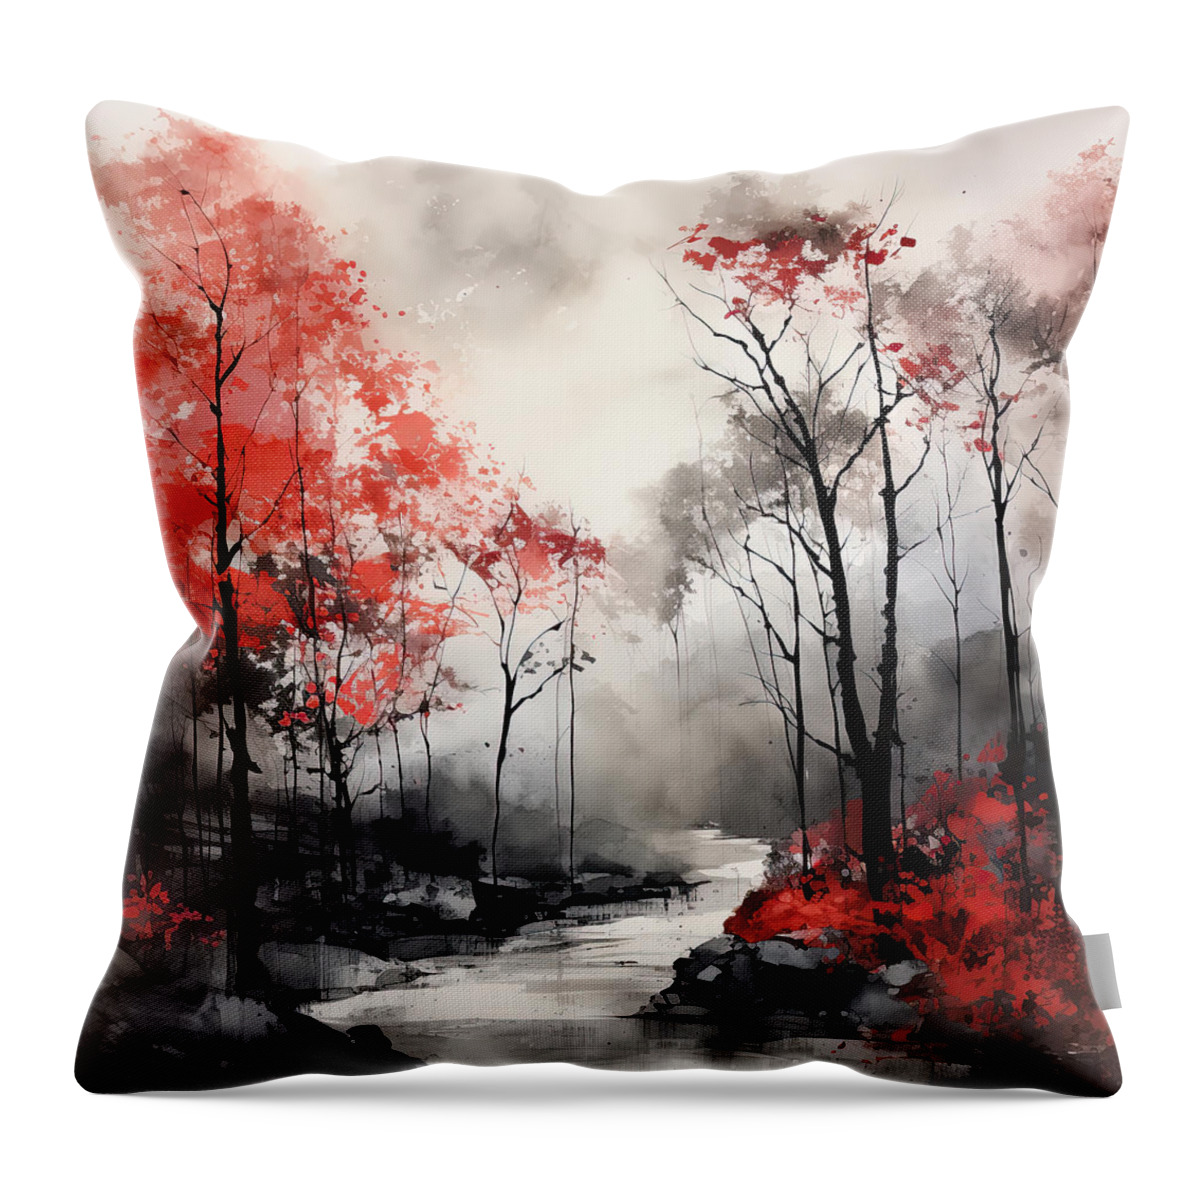 Red And Gray Throw Pillow featuring the painting Nature Red Intertwine by Lourry Legarde